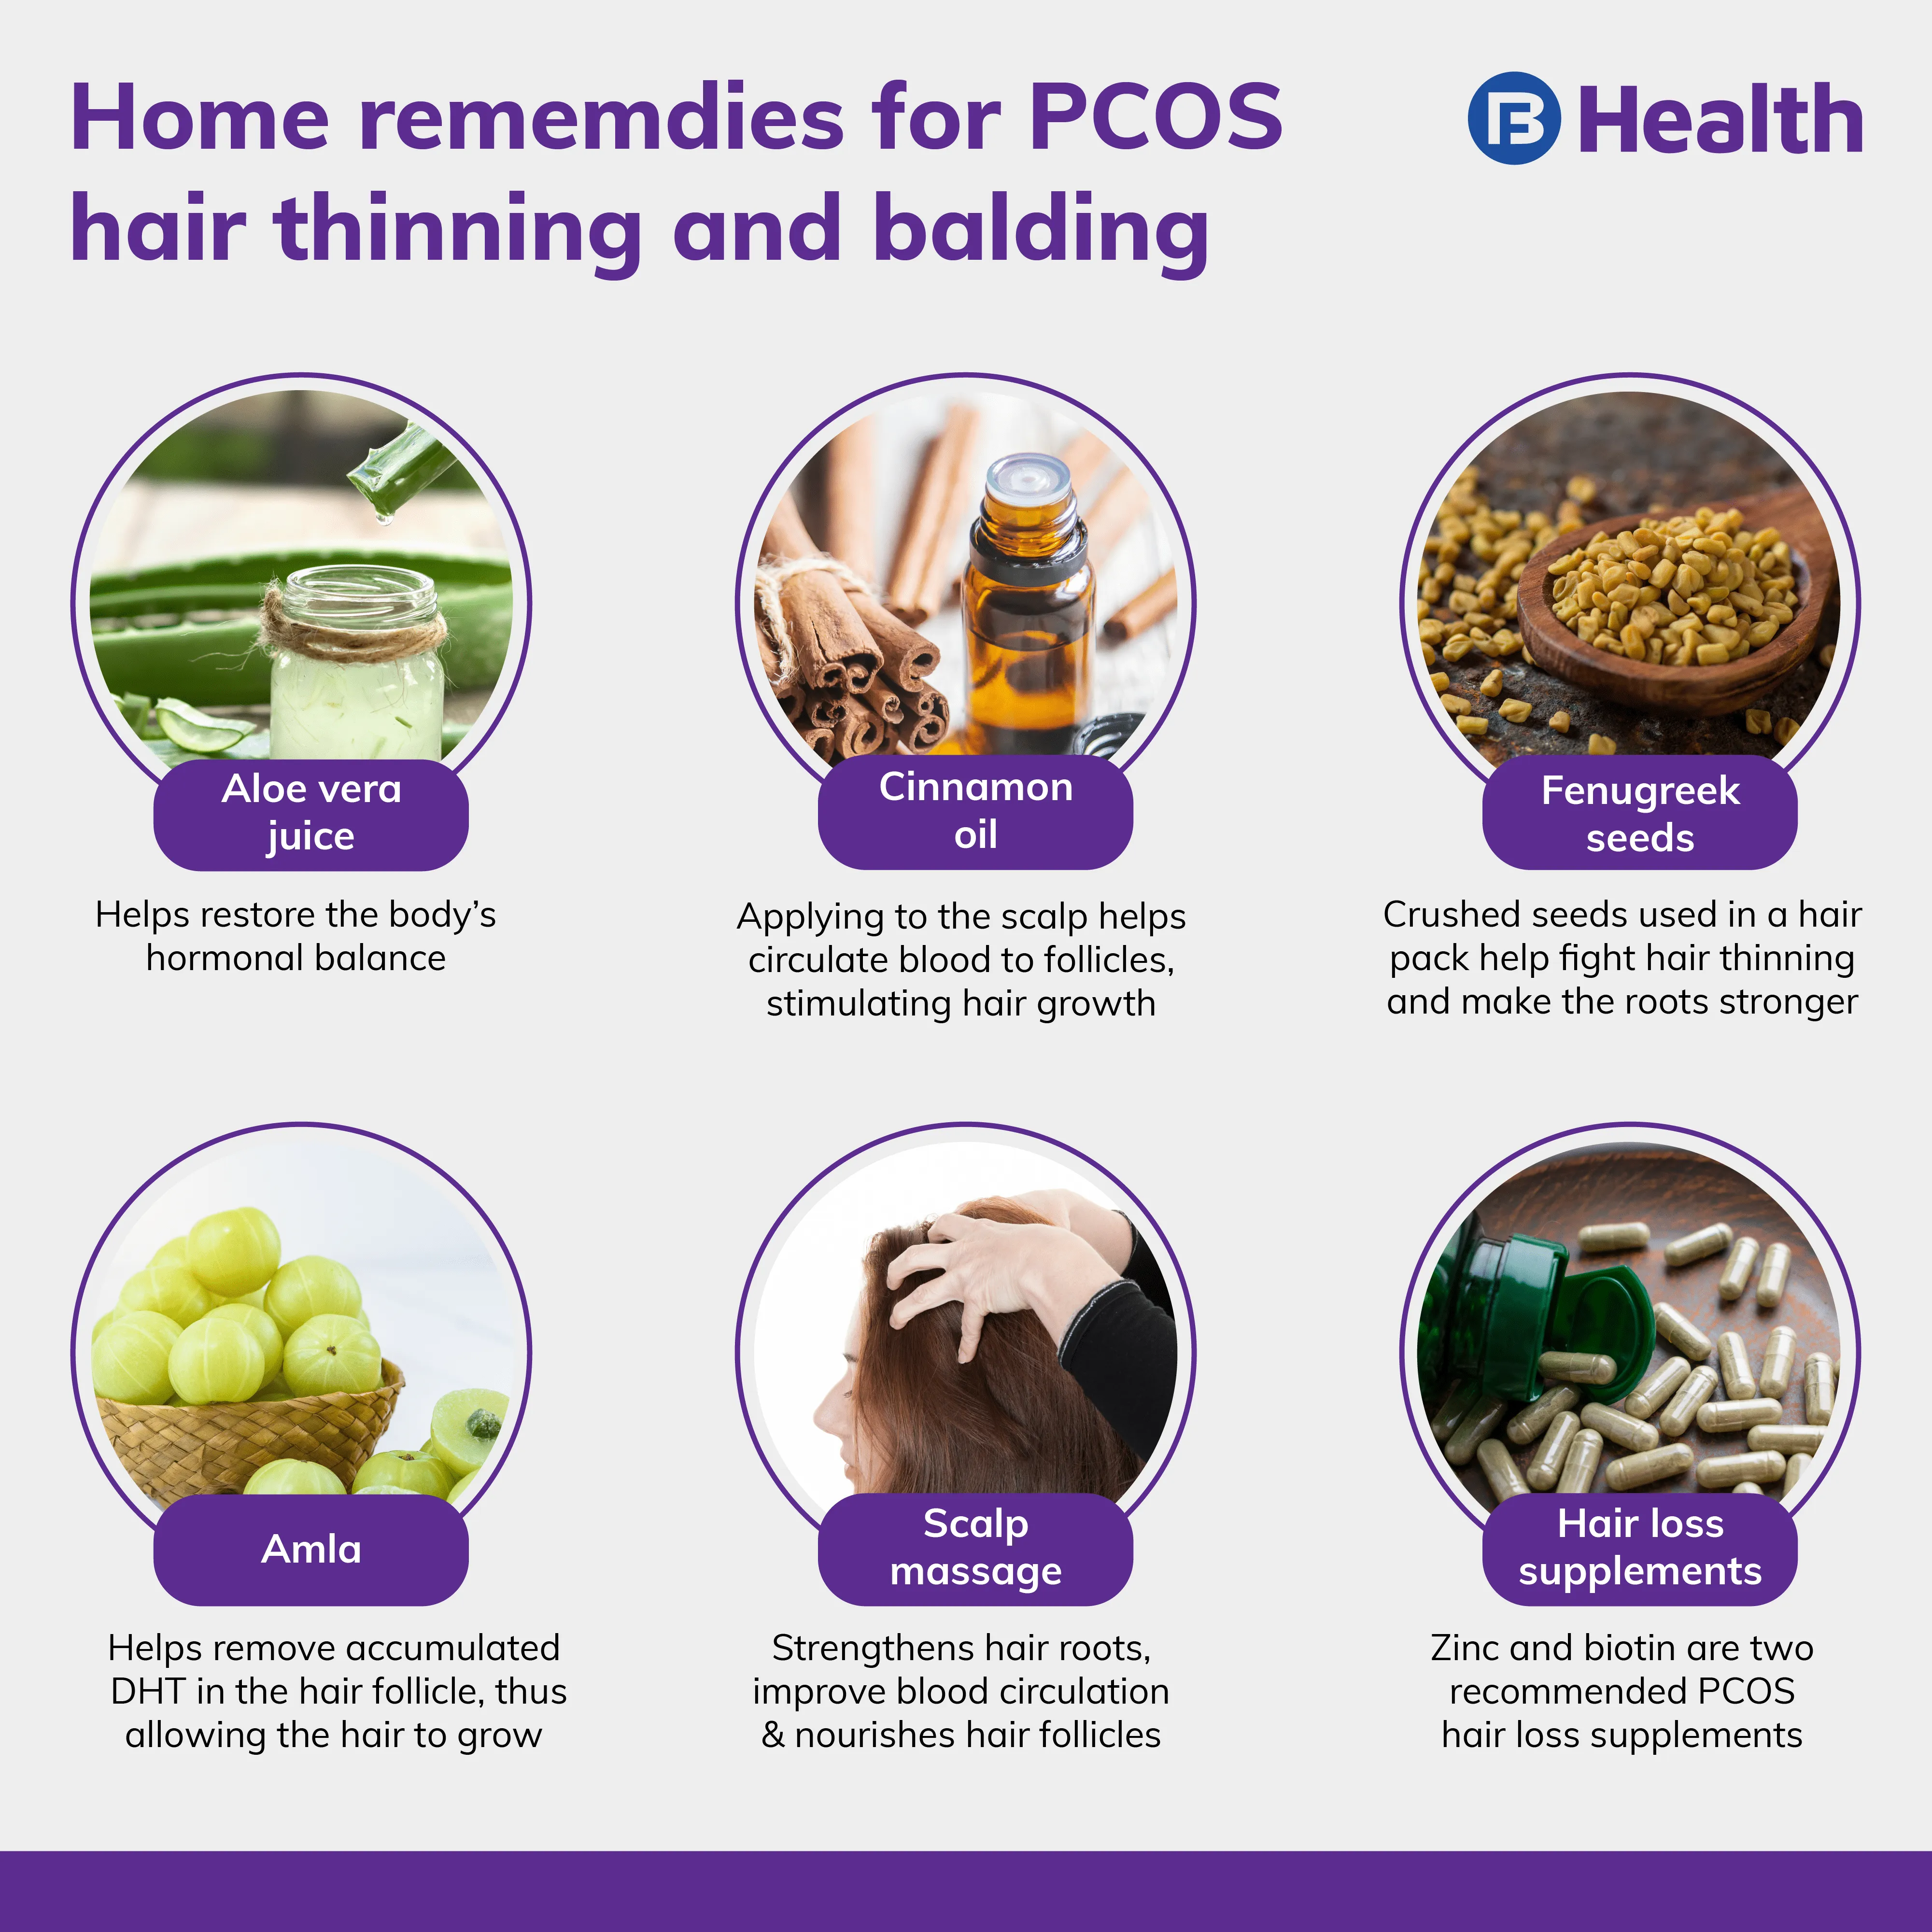 Can PCOS Cause Acne, Hair Loss, and Hair Thinning? – Mpc Health